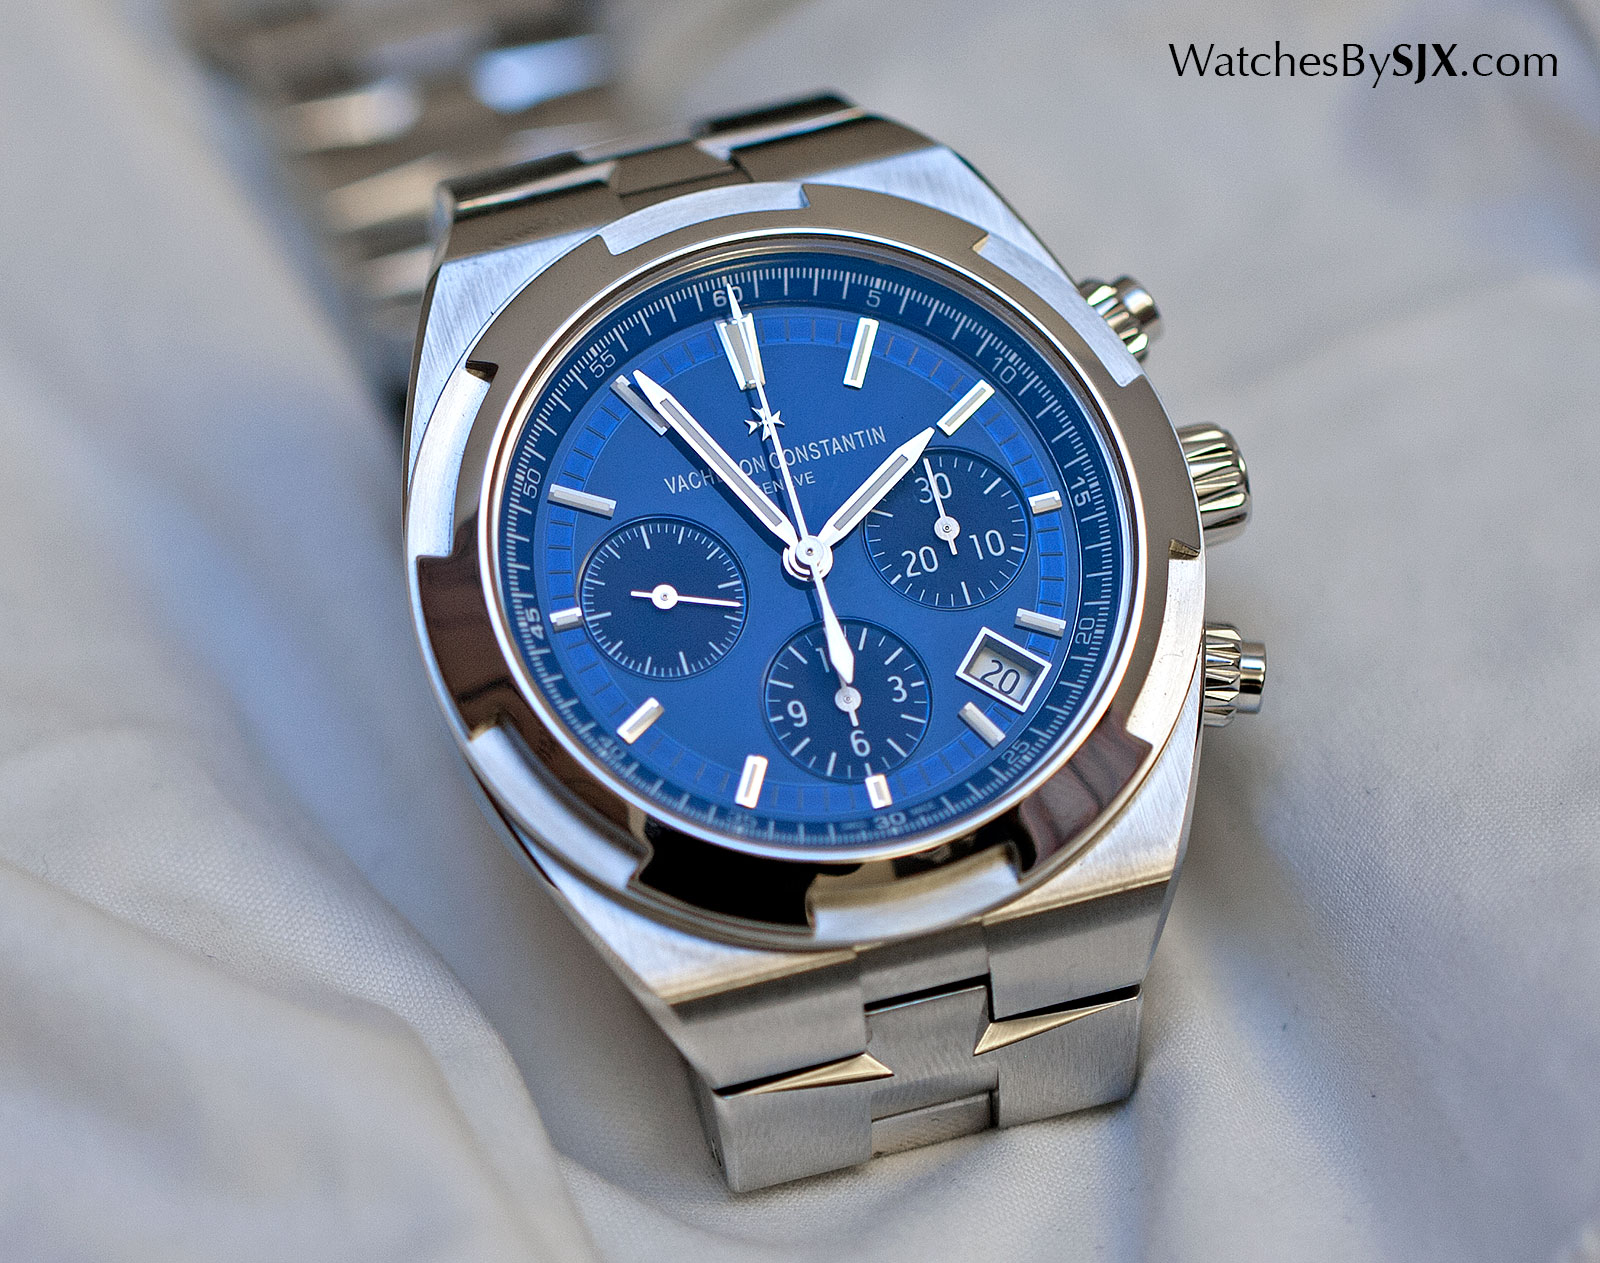 A Sojourn with the Vacheron Constantin Overseas World Time | SJX Watches